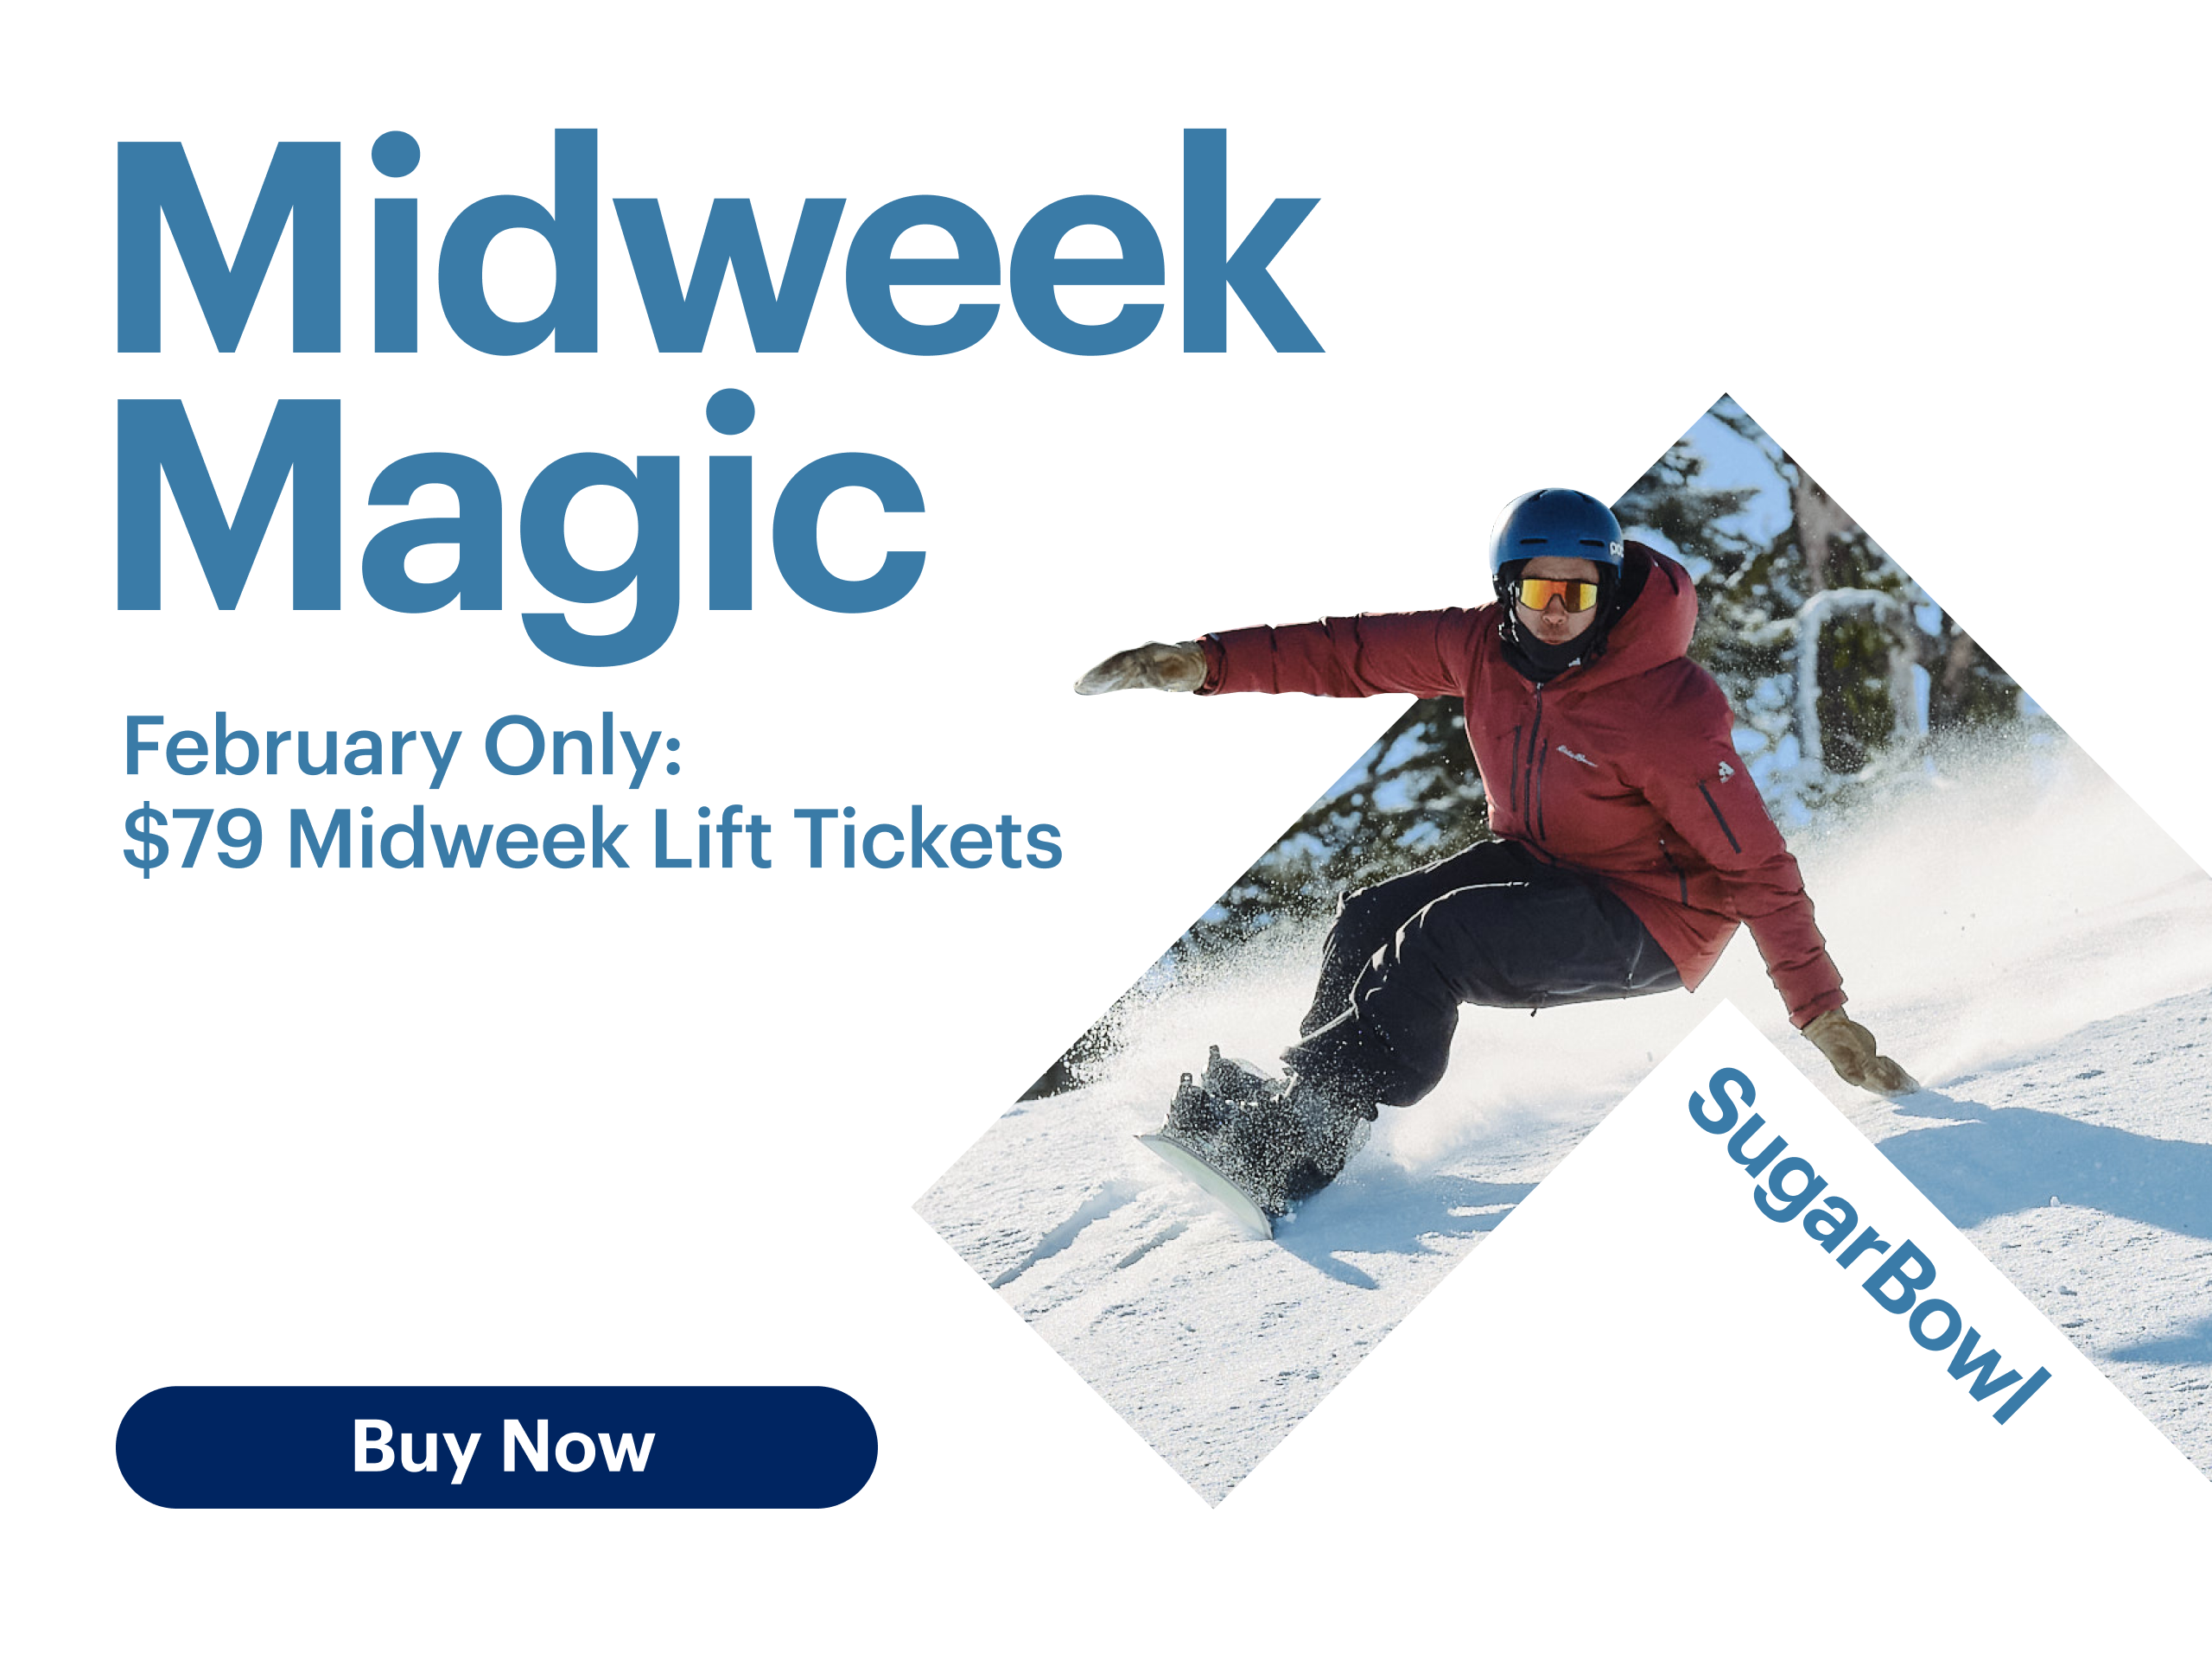 Midweek Magic, $79 Lift Tickets in February